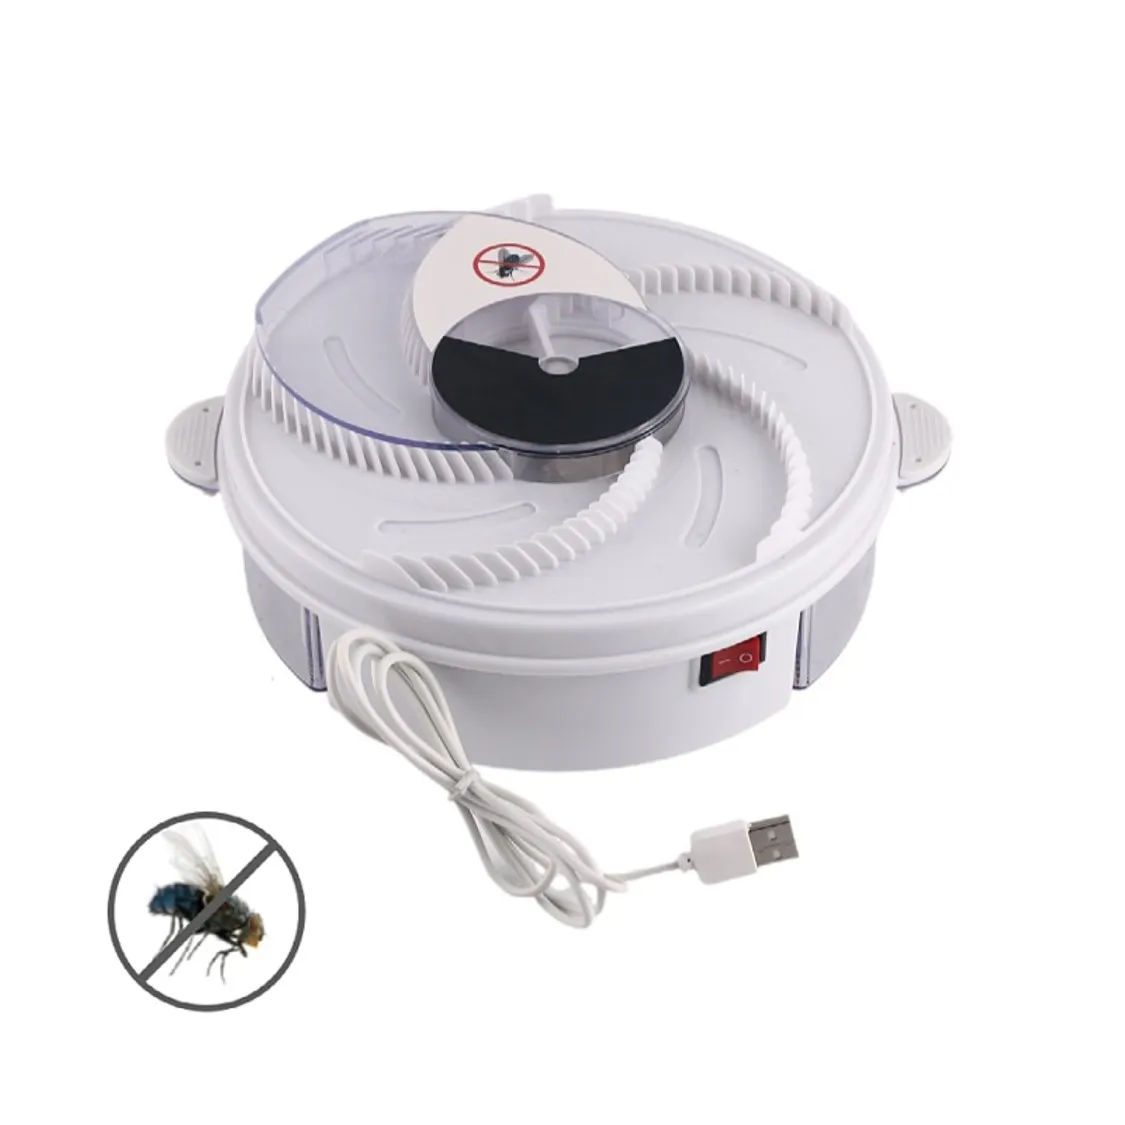 

Electric Usb Automatic Fly Trap Control Catcher Electric Fly Trap Flycatcher Pest Insect Catcher Device Flytrap